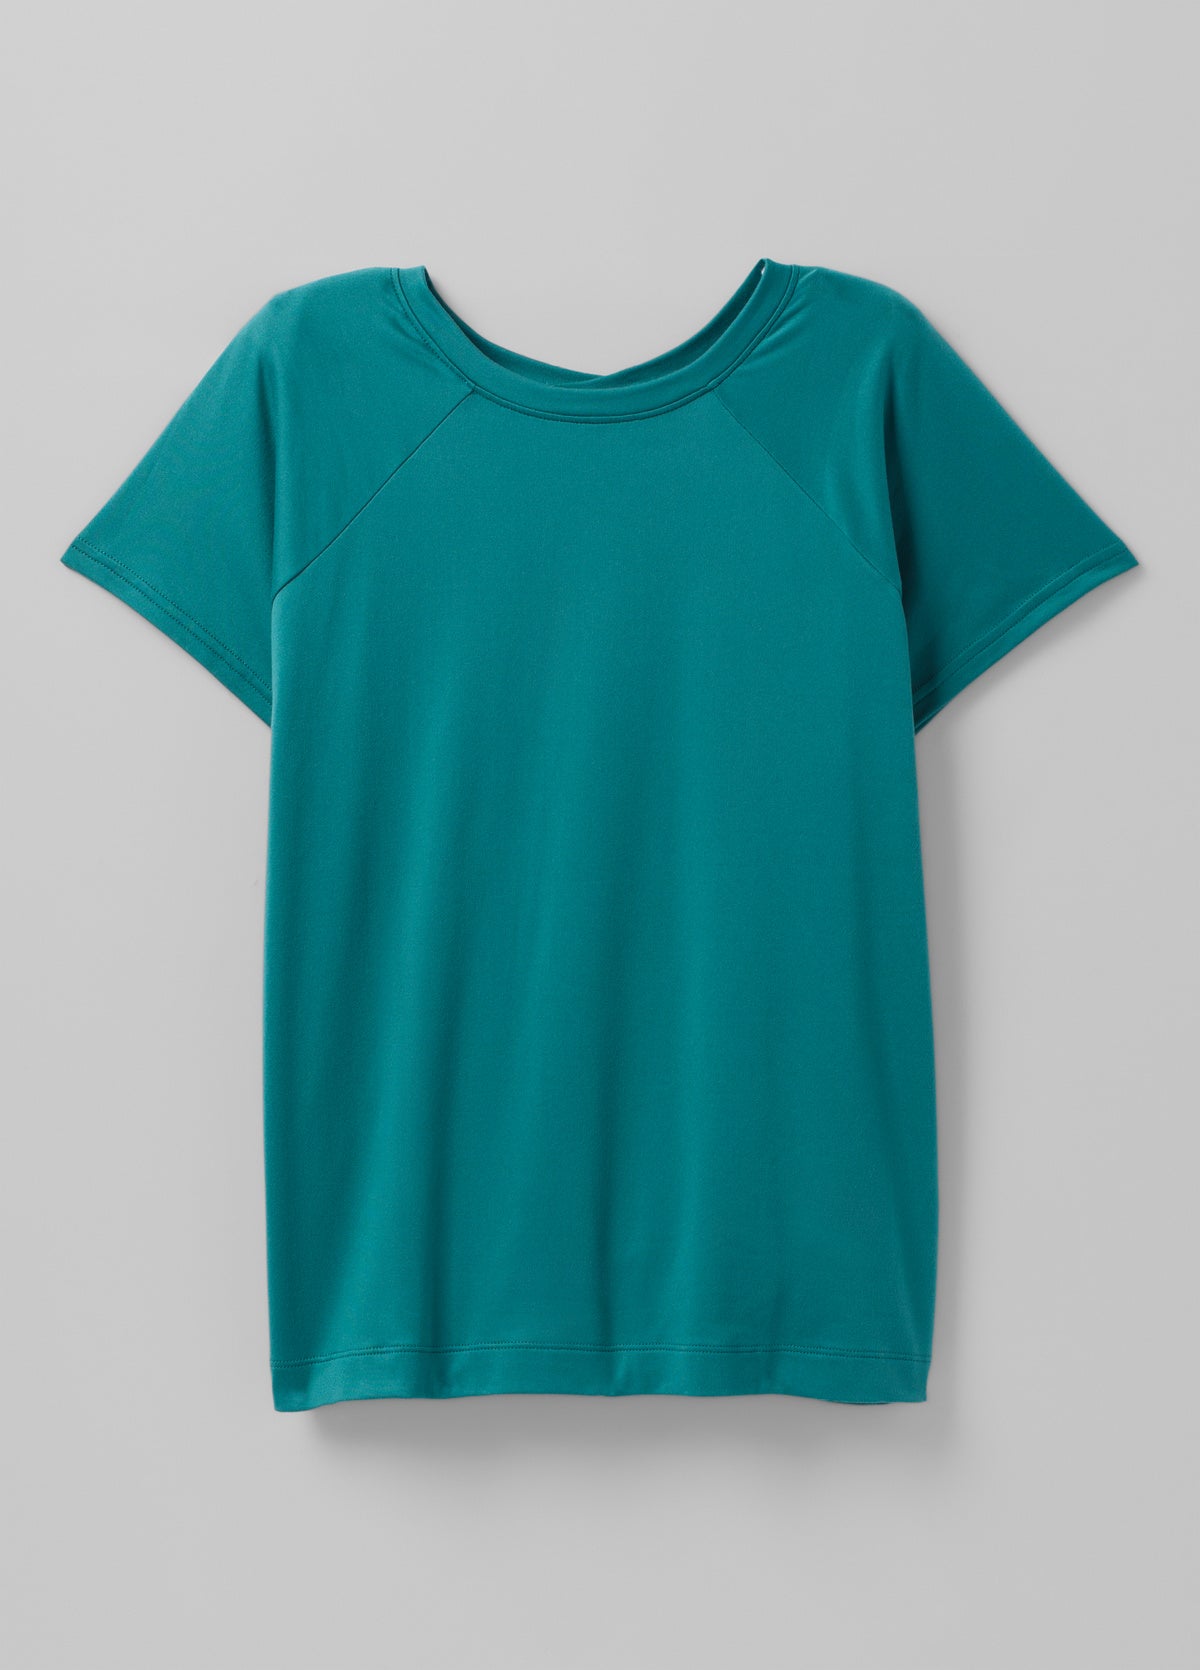 Prana - Aspenglow Short Sleeve Plus - Cove - all things being eco chilliwack - women's plus size clothing store - size inclusive - fair trade fashion - shirt details